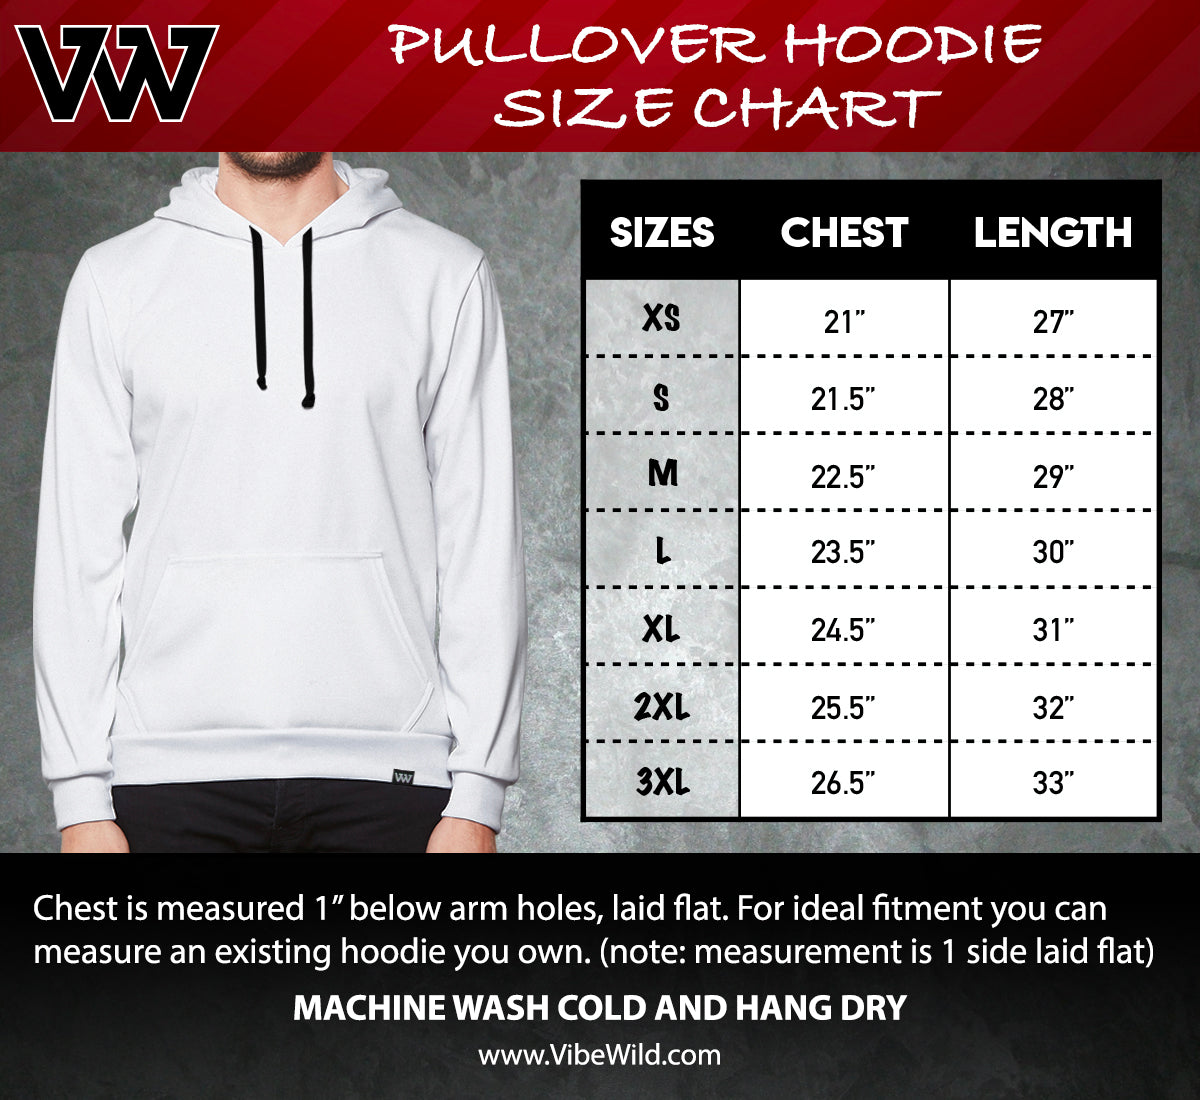 Vibe Wild Pullover Hoodie Size Chart